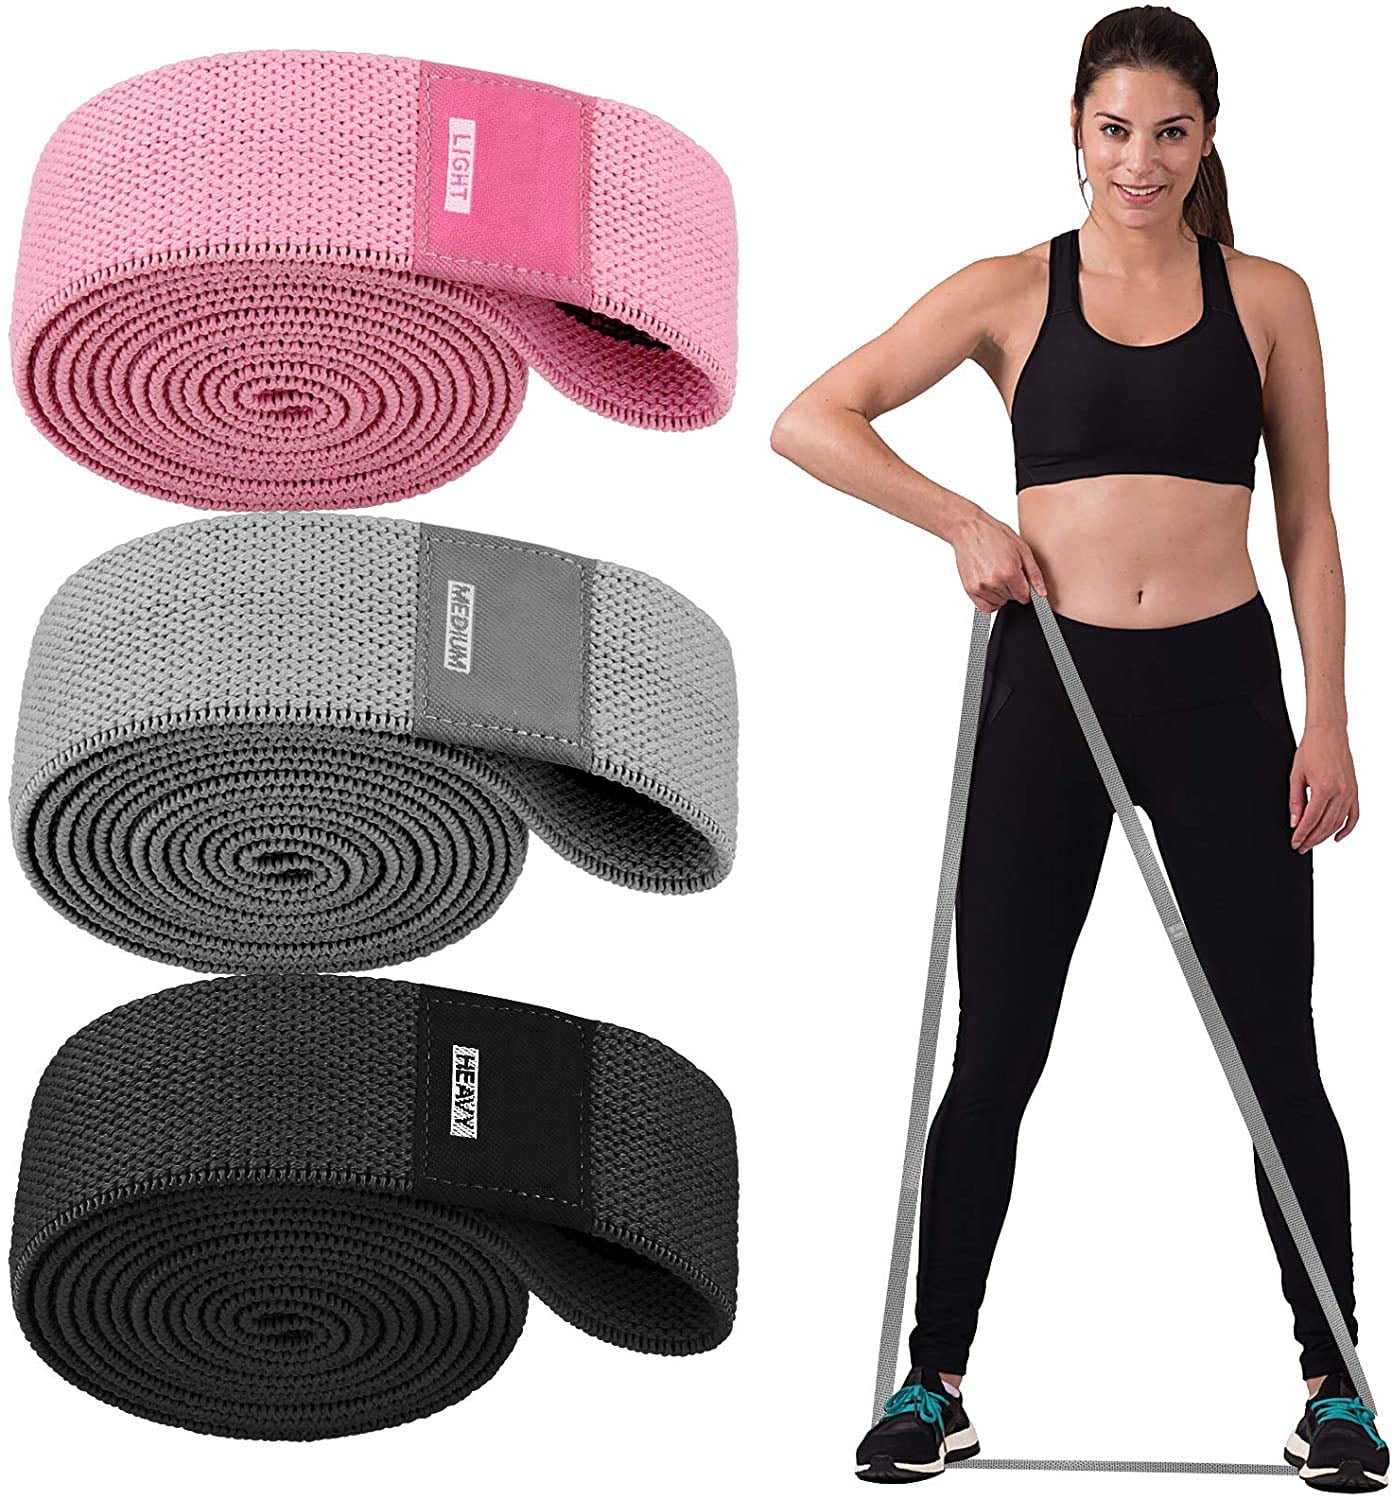 Pilates Long Resistance Bands In Light Stretch Strength Training Workout Flat Latex Free Home Gym Fitness Equipment For Physical Therapy Yoga Medium or Heavy Te 4 Pack Super Exercise Band 5 ft